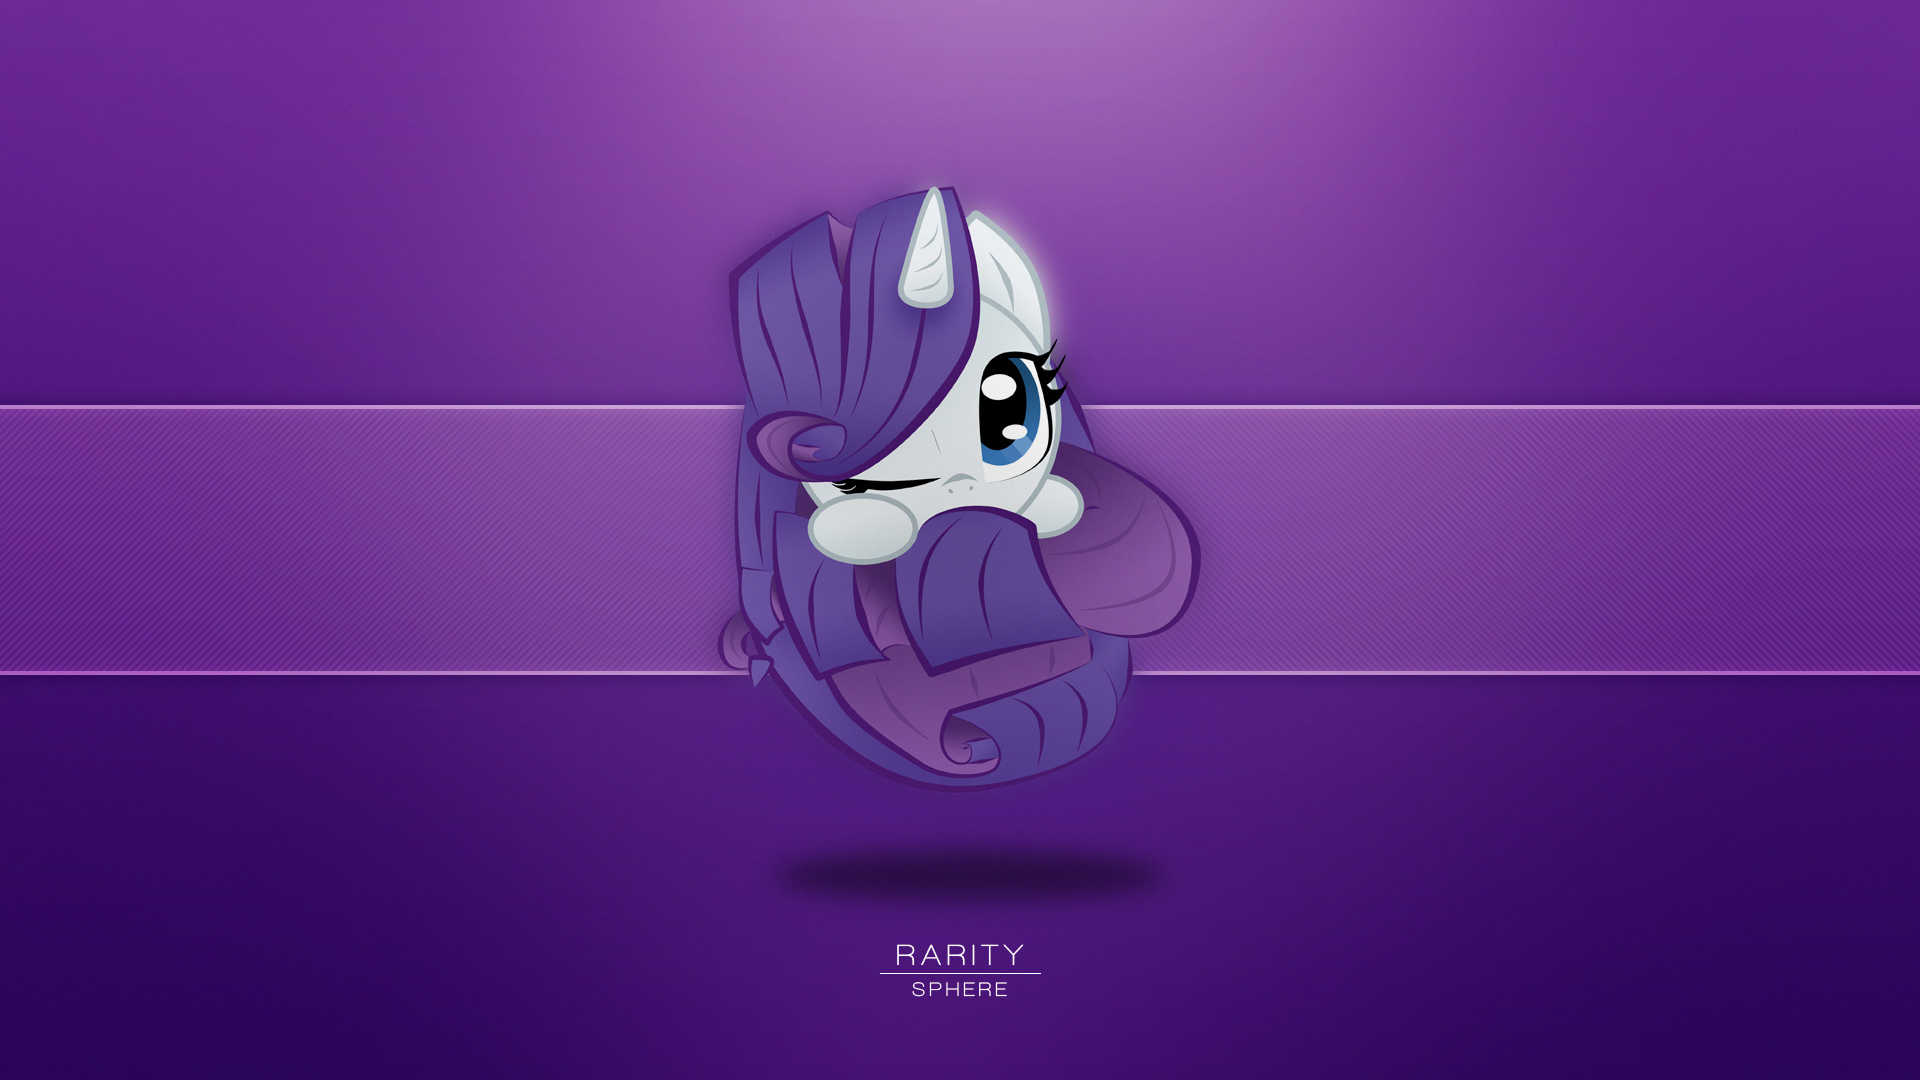 Cutepaper ~ Rarity Sphere. by Mackaged and Zackira